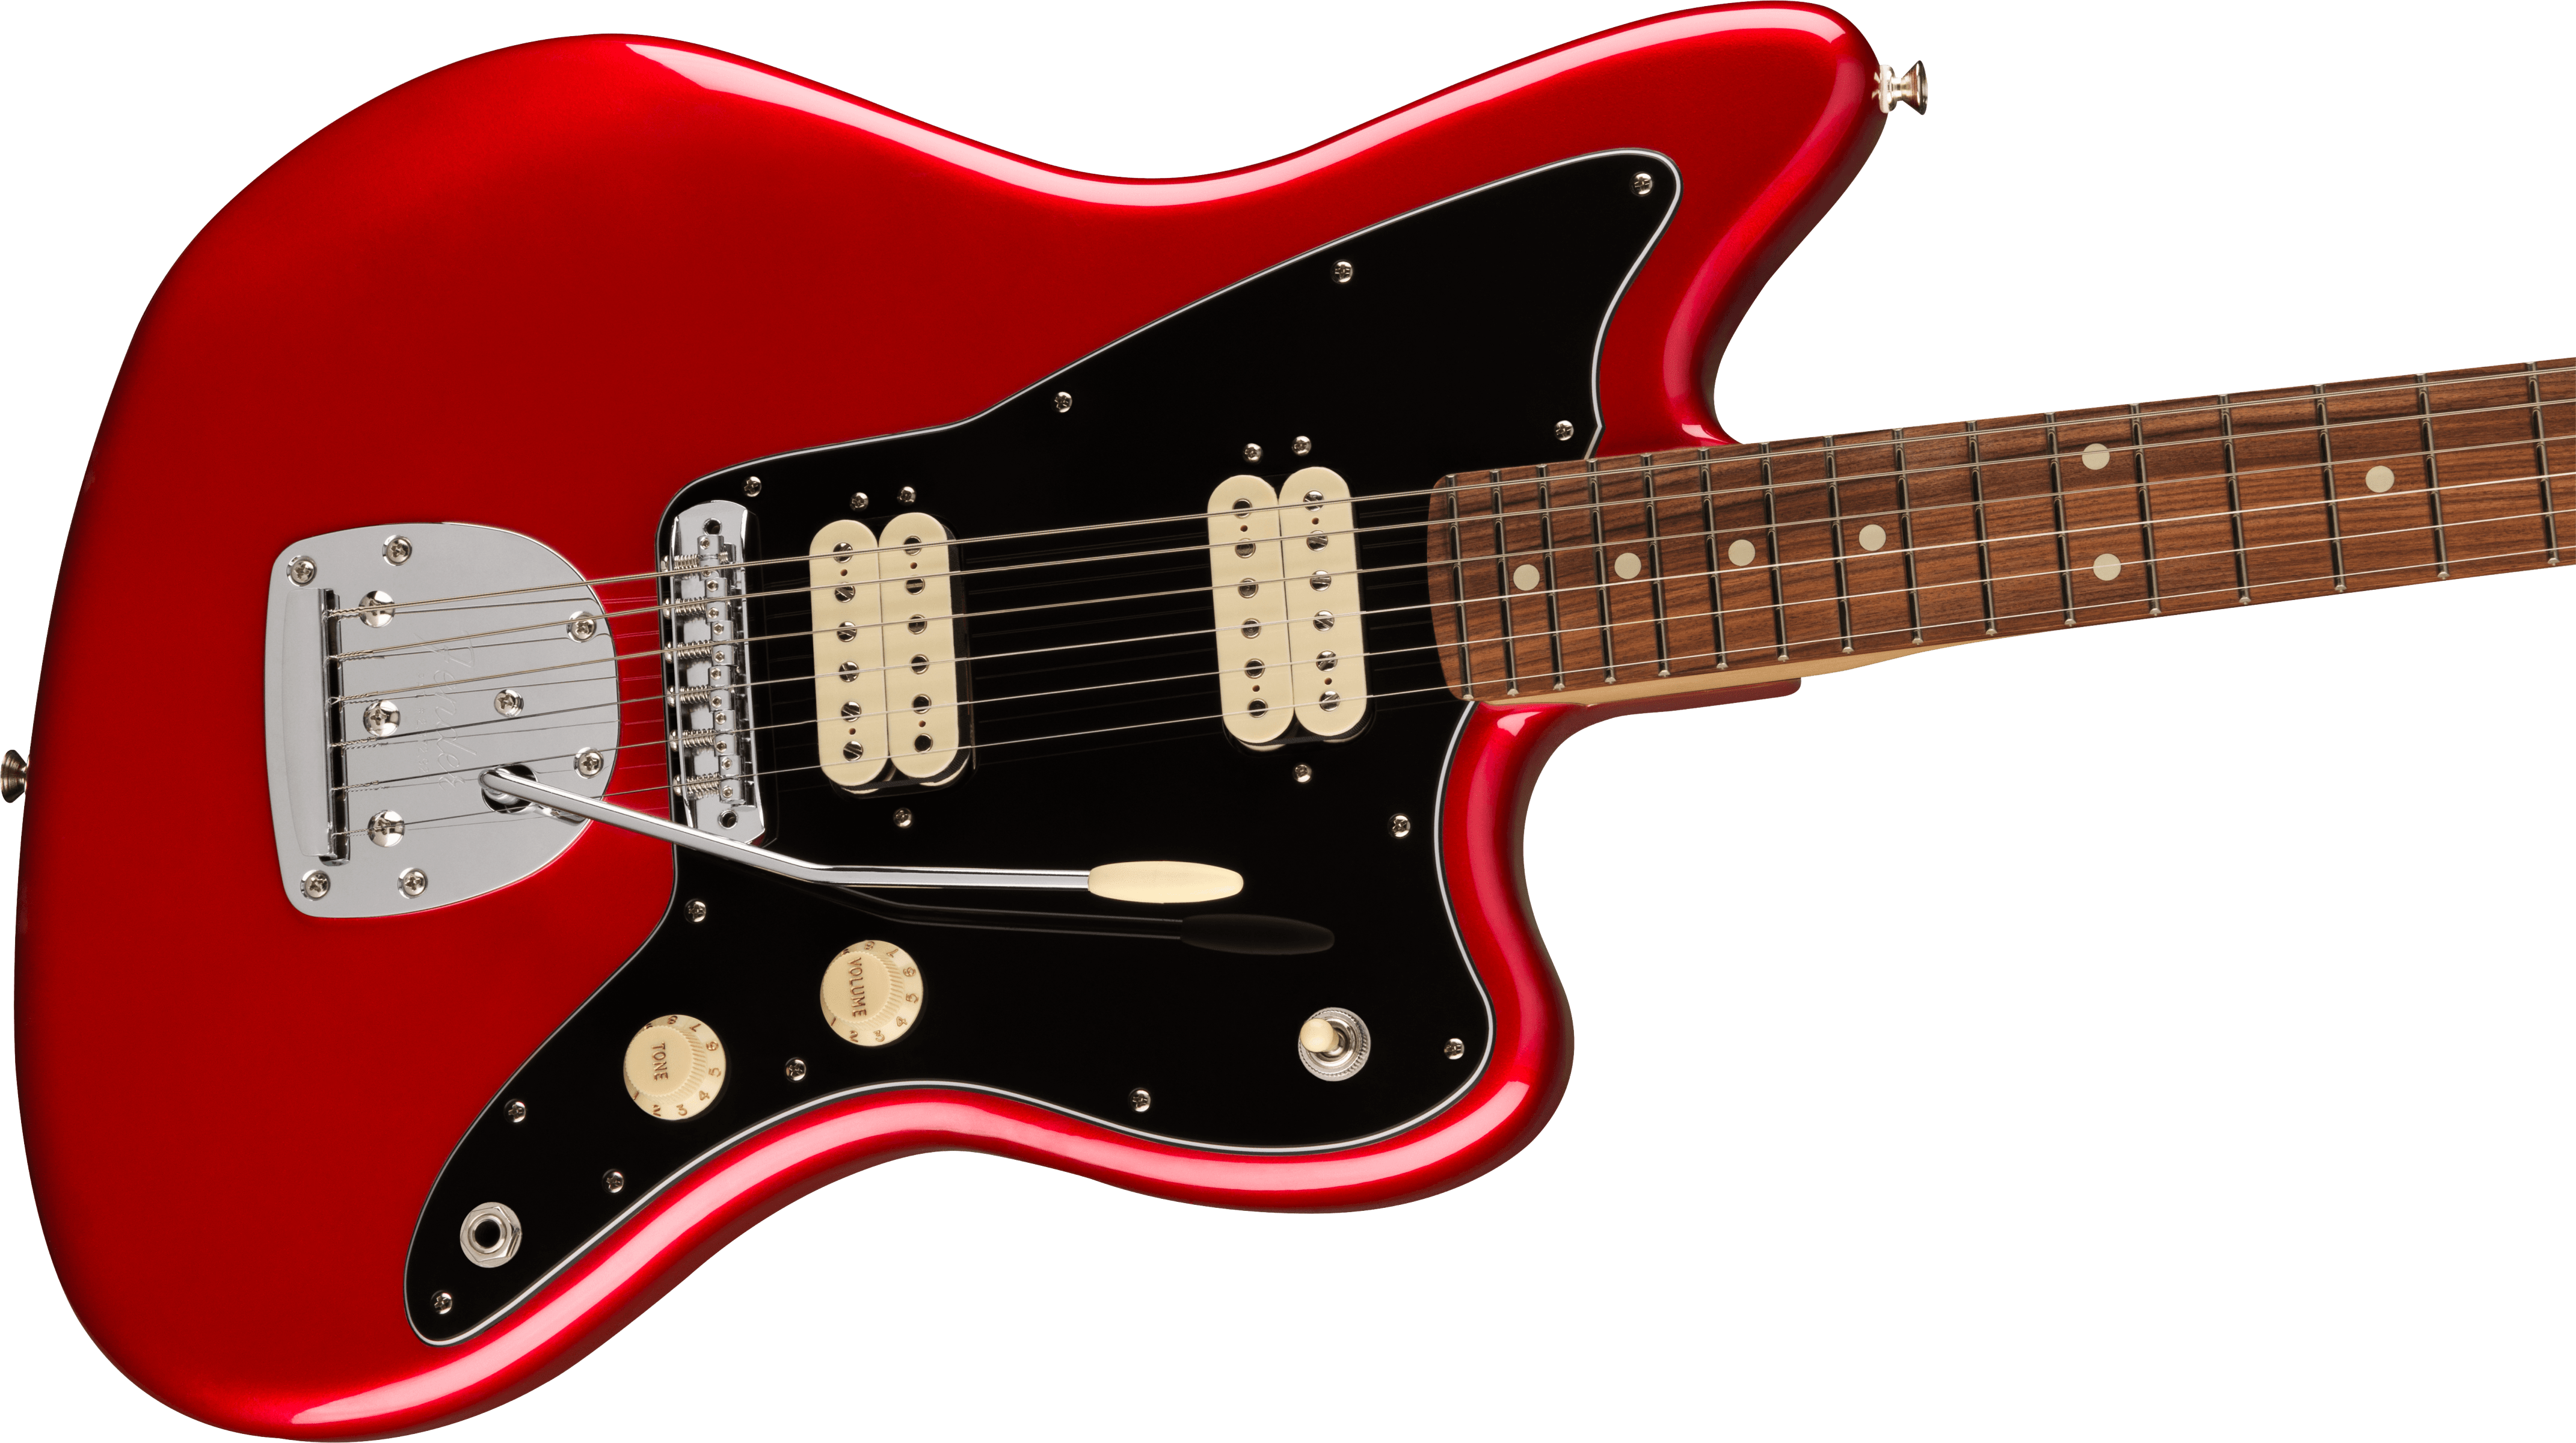 Fender Jazzmaster Player Hh Mex 2023 Trem 2h Pf - Candy Apple Red - Retro rock electric guitar - Variation 3